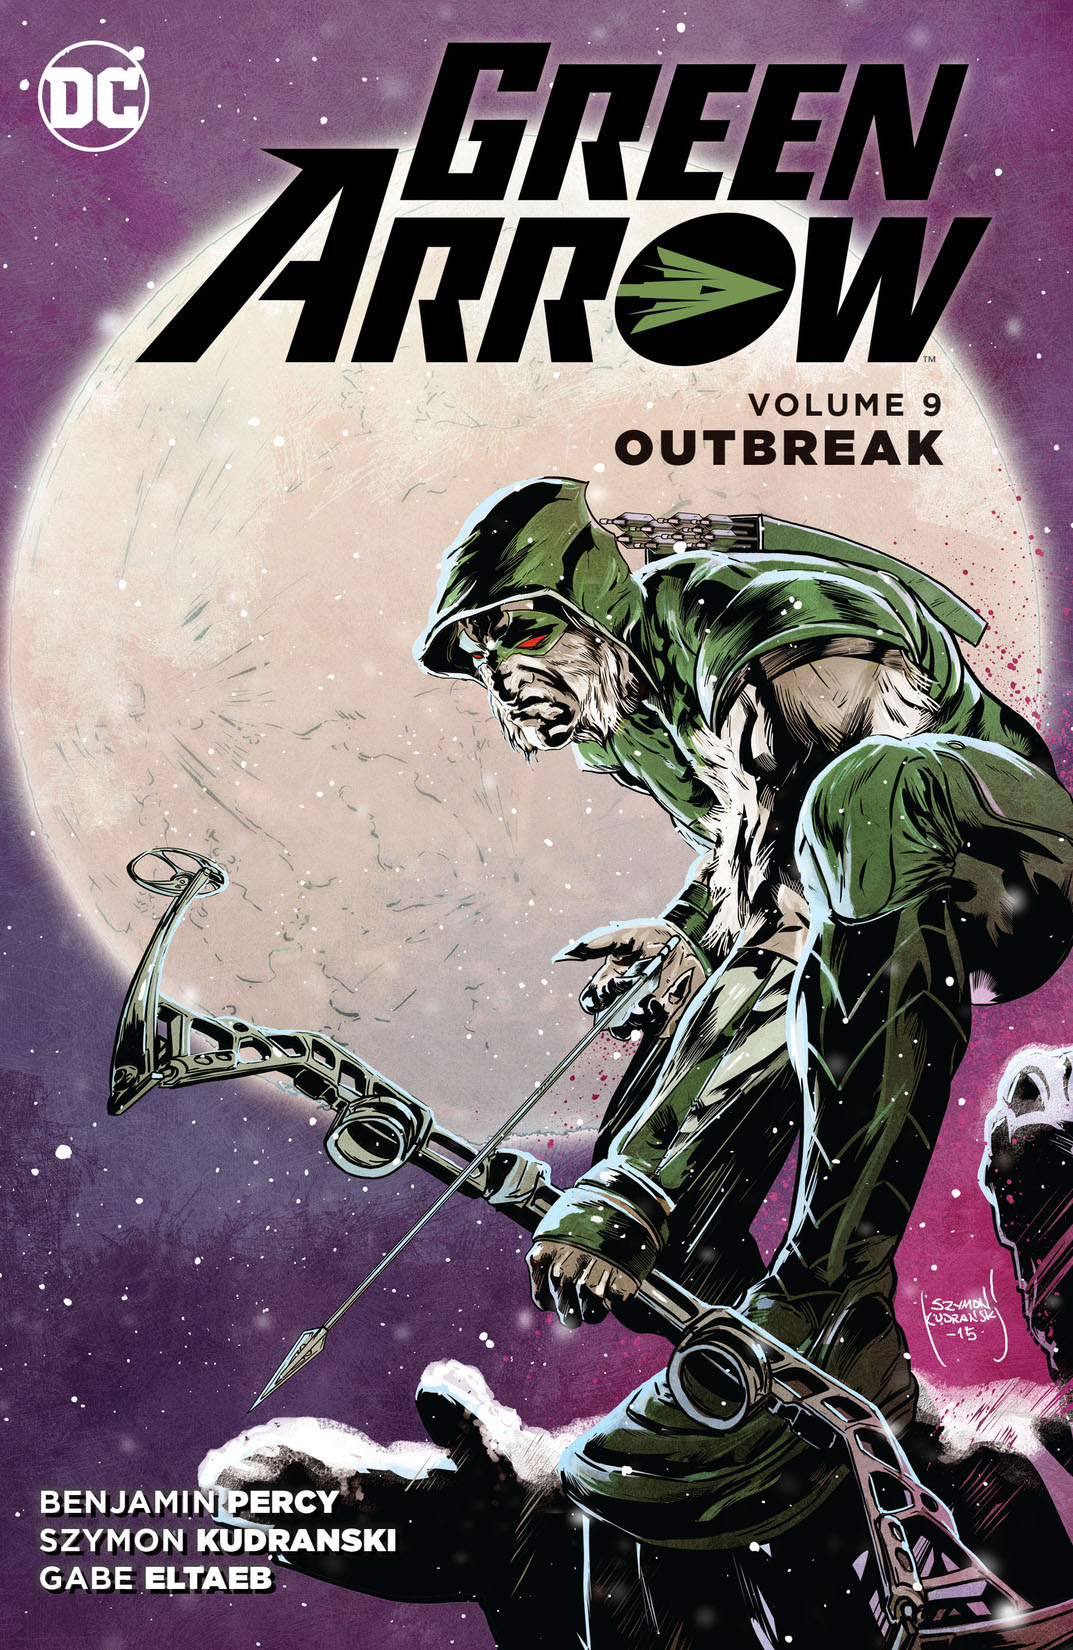 Green Arrow Vol. 9: Outbreak preview images